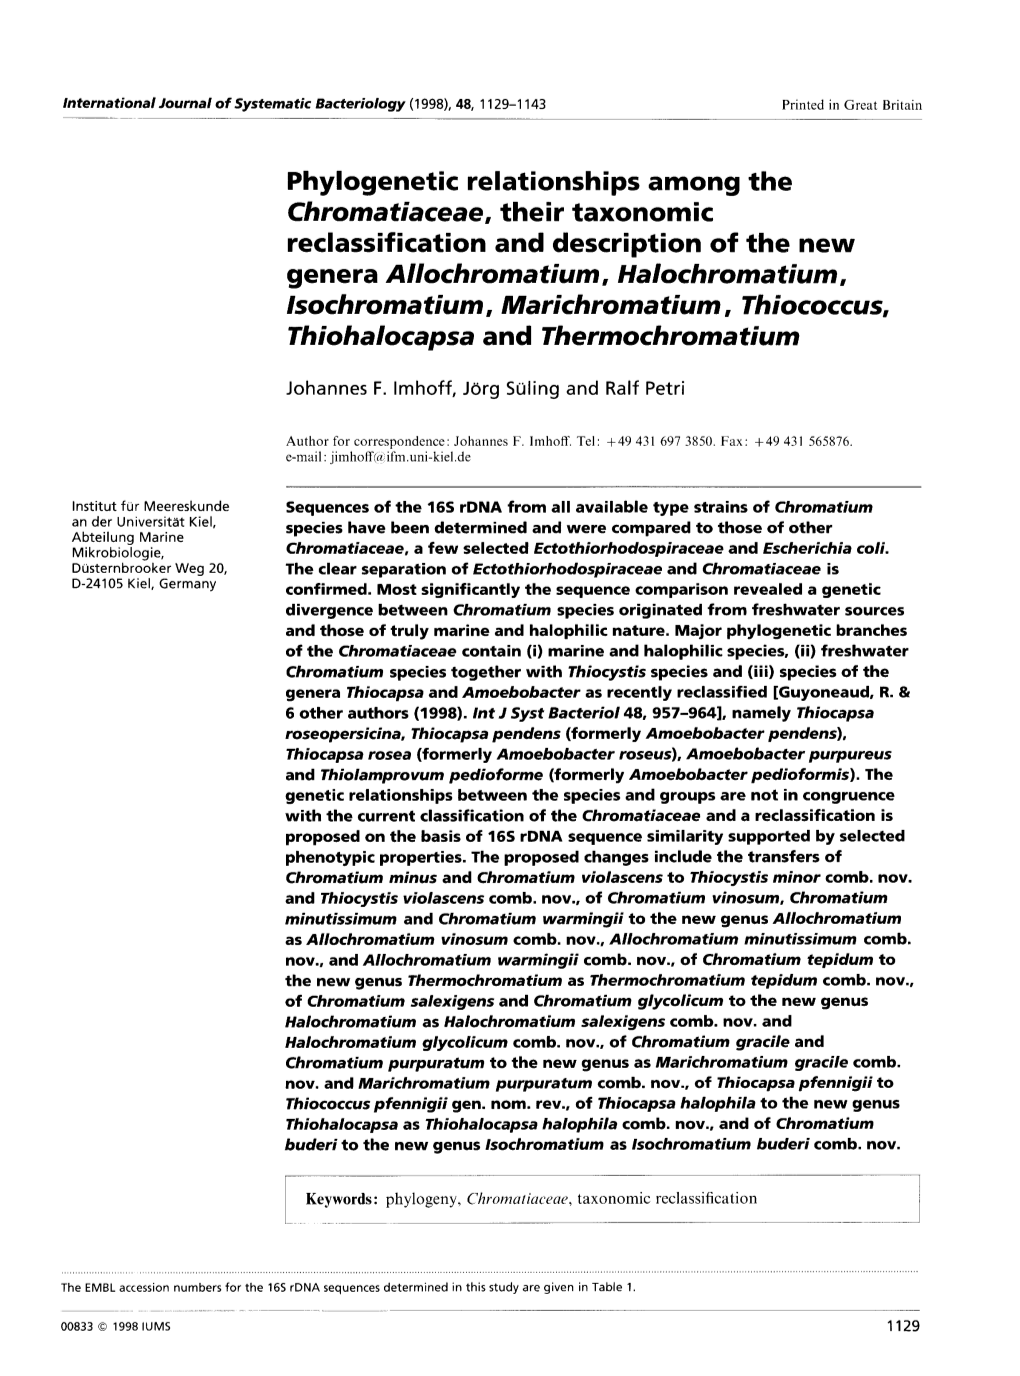 Phylogenetic Relationships Among the Chromatiaceae, Their